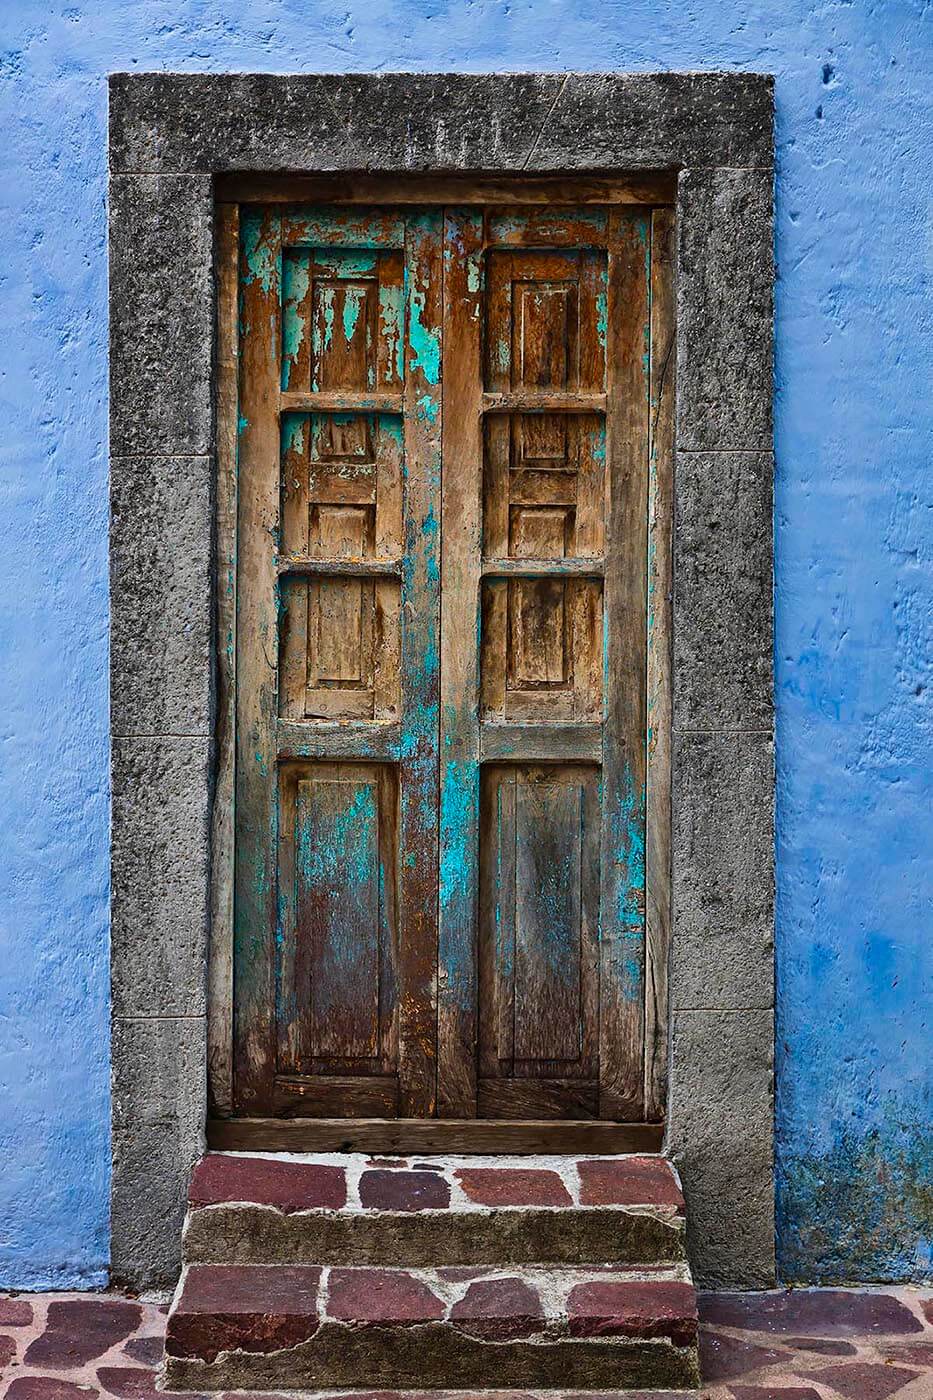 Stone and wood are part of the architecture of SAN MIGUEL DE ALLENDE MEXICO.  - Architecture photography by Eagle Visions Photography